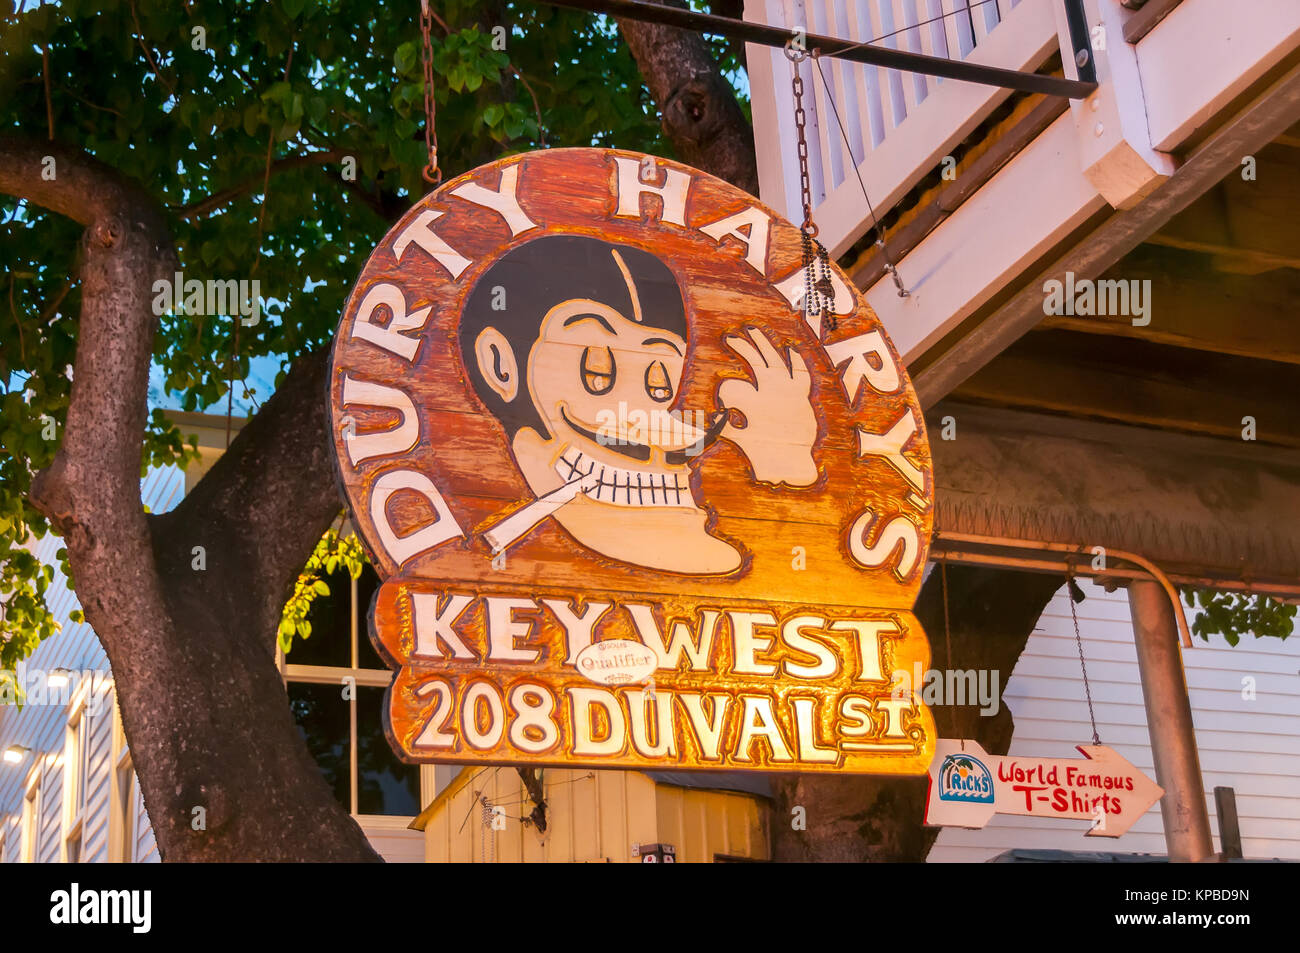 Durty Harrys Bar features rock music and live performances, Duval Street Key West Florida Stock Photo